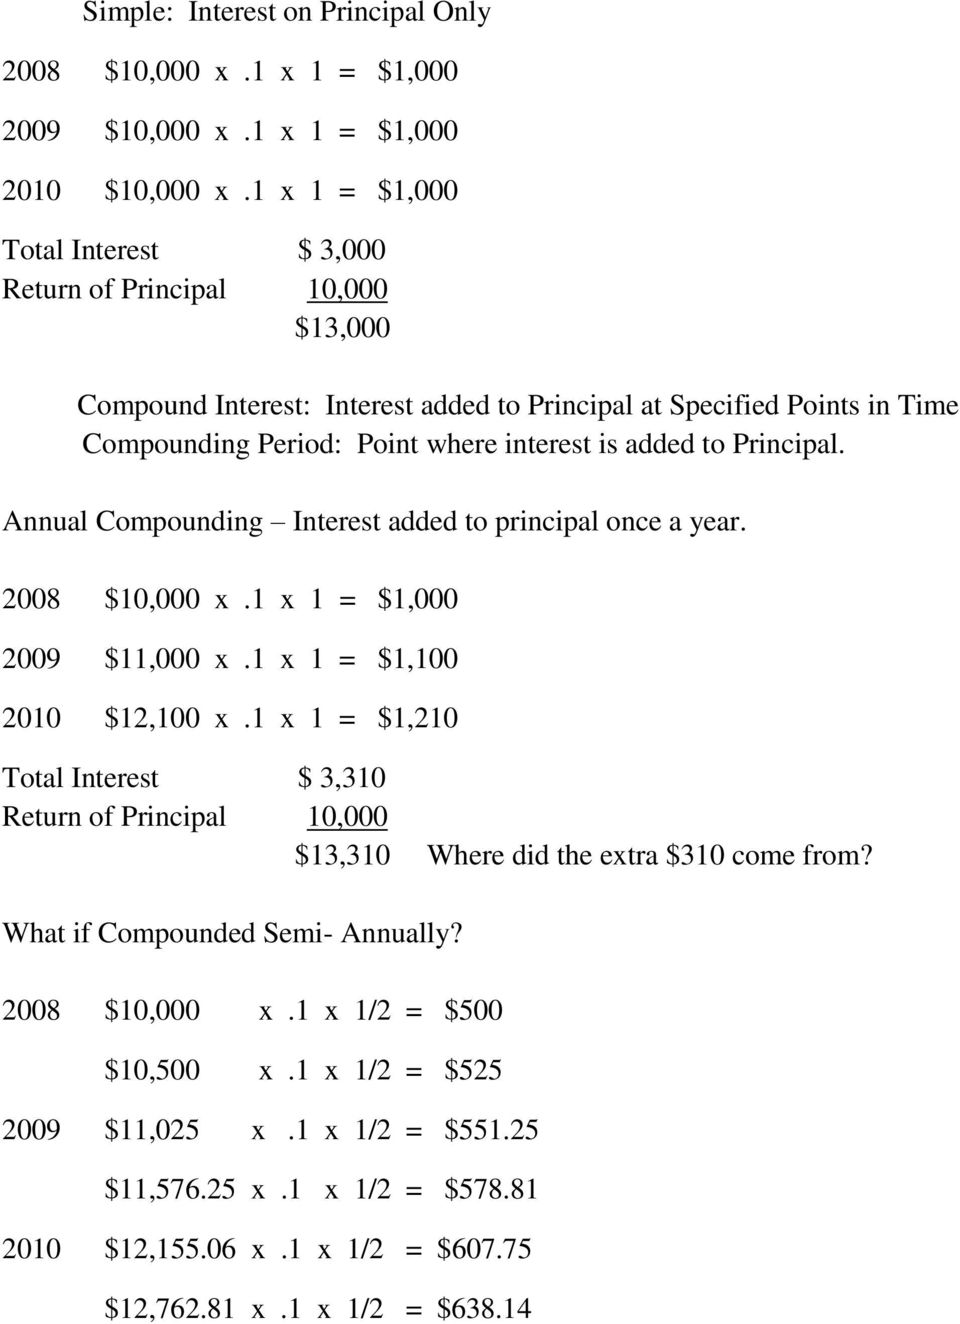 added to Principal. Annual Compounding Interest added to principal once a year. 2008 $10,000 x.1 x 1 = $1,000 2009 $11,000 x.1 x 1 = $1,100 2010 $12,100 x.